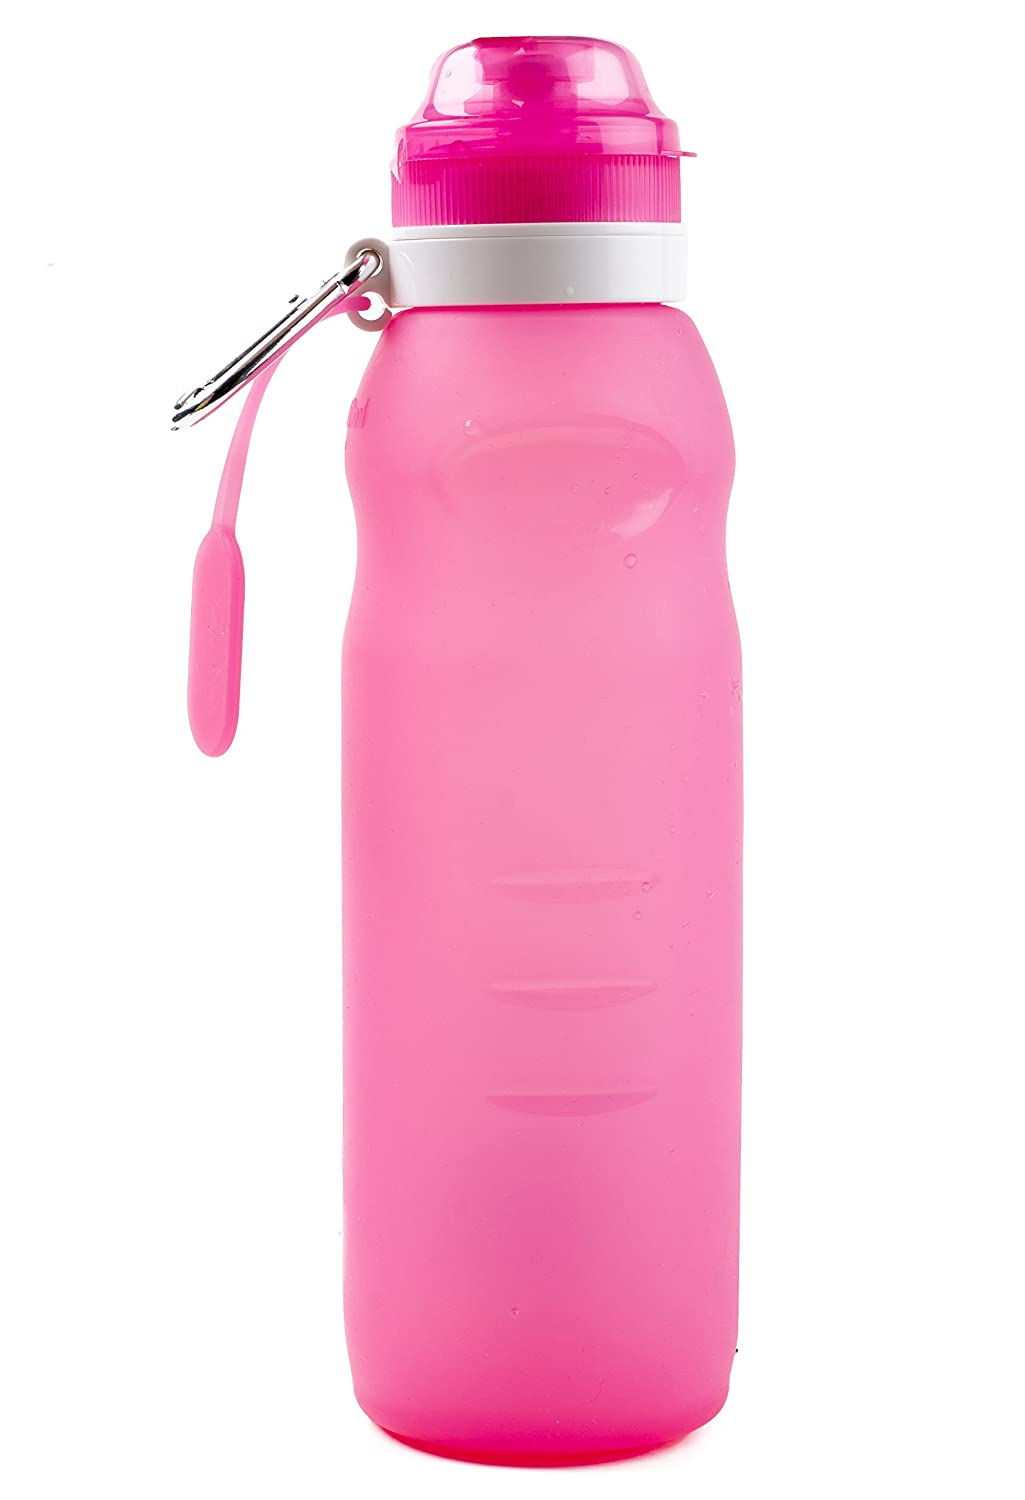 Importikaah-Collapsible-Silicone-Water-Bottle 